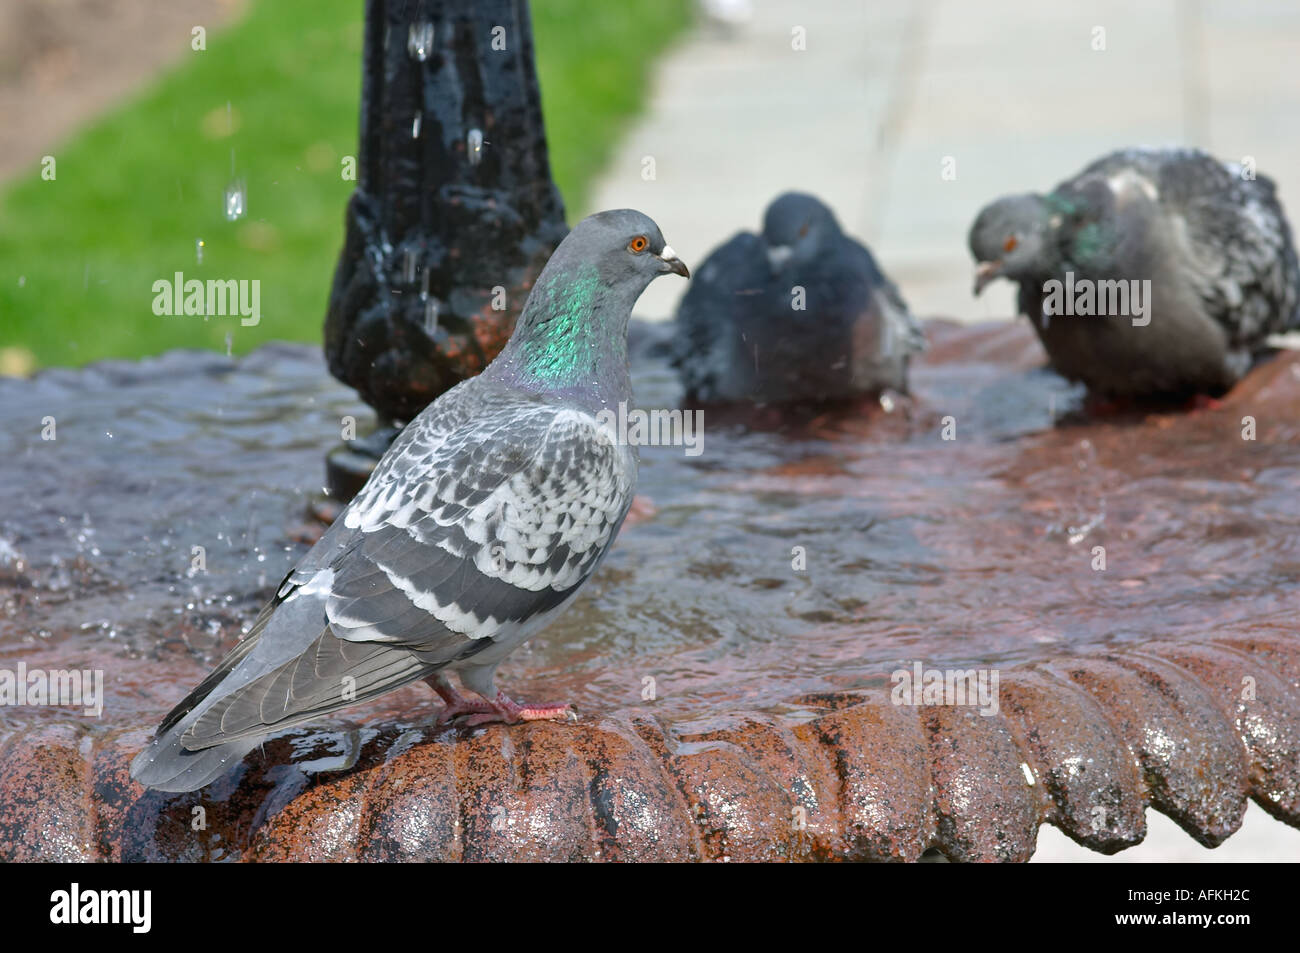 Pidgeons bathing in a park fountain Stock Photo